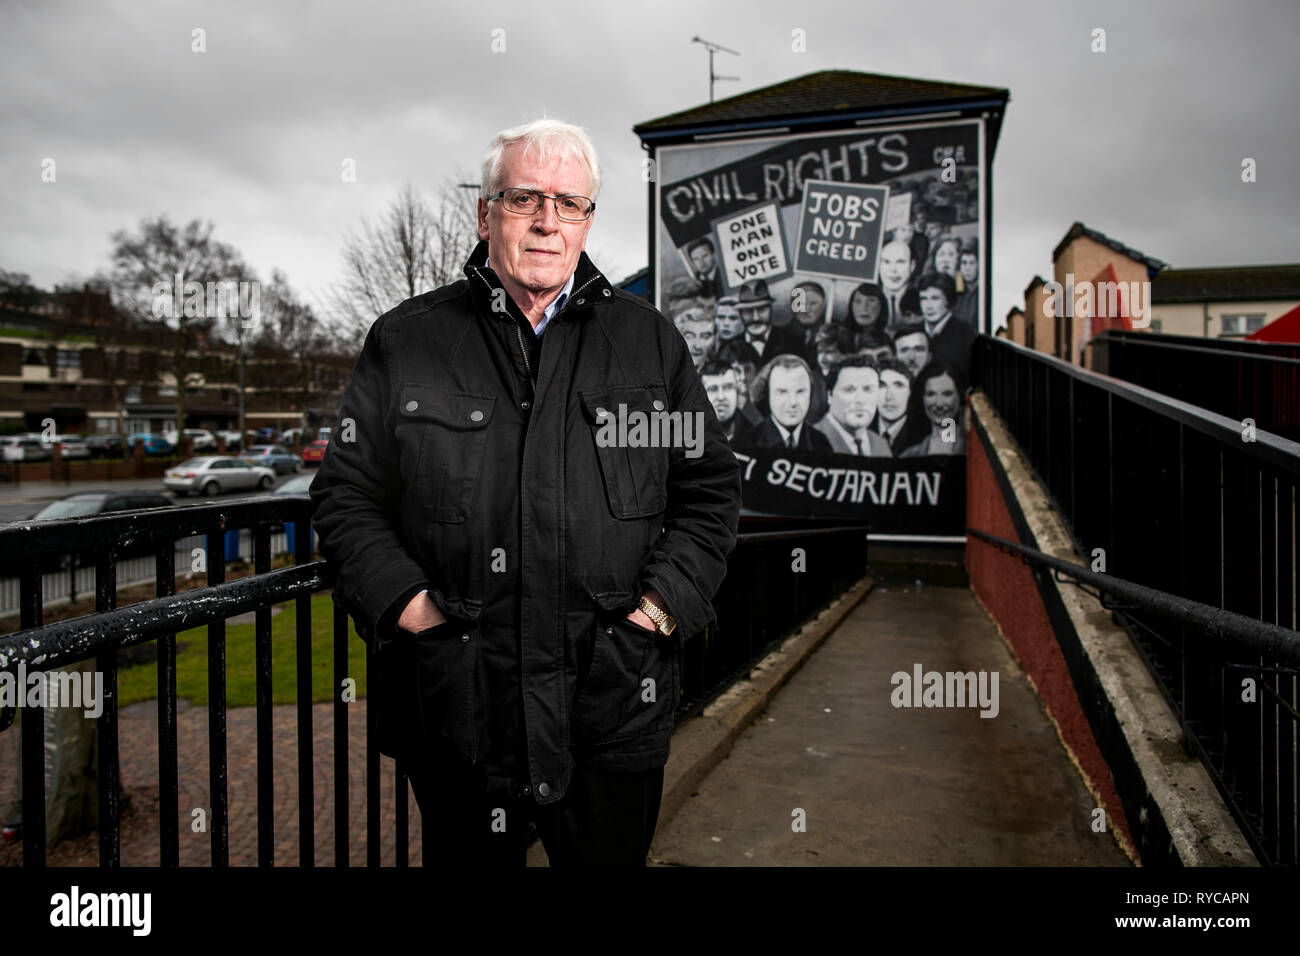 John Kelly whose brother 17 year old Michael was killed in Derry on Bloody Sunday standing beside the Civil Rights Bogside mural. The Public Prosecution Service is expected to announce on Thursday whether it will pursue prosecutions against soldiers over the deaths of 13 people in Londonderry on January 30 1972. Stock Photo